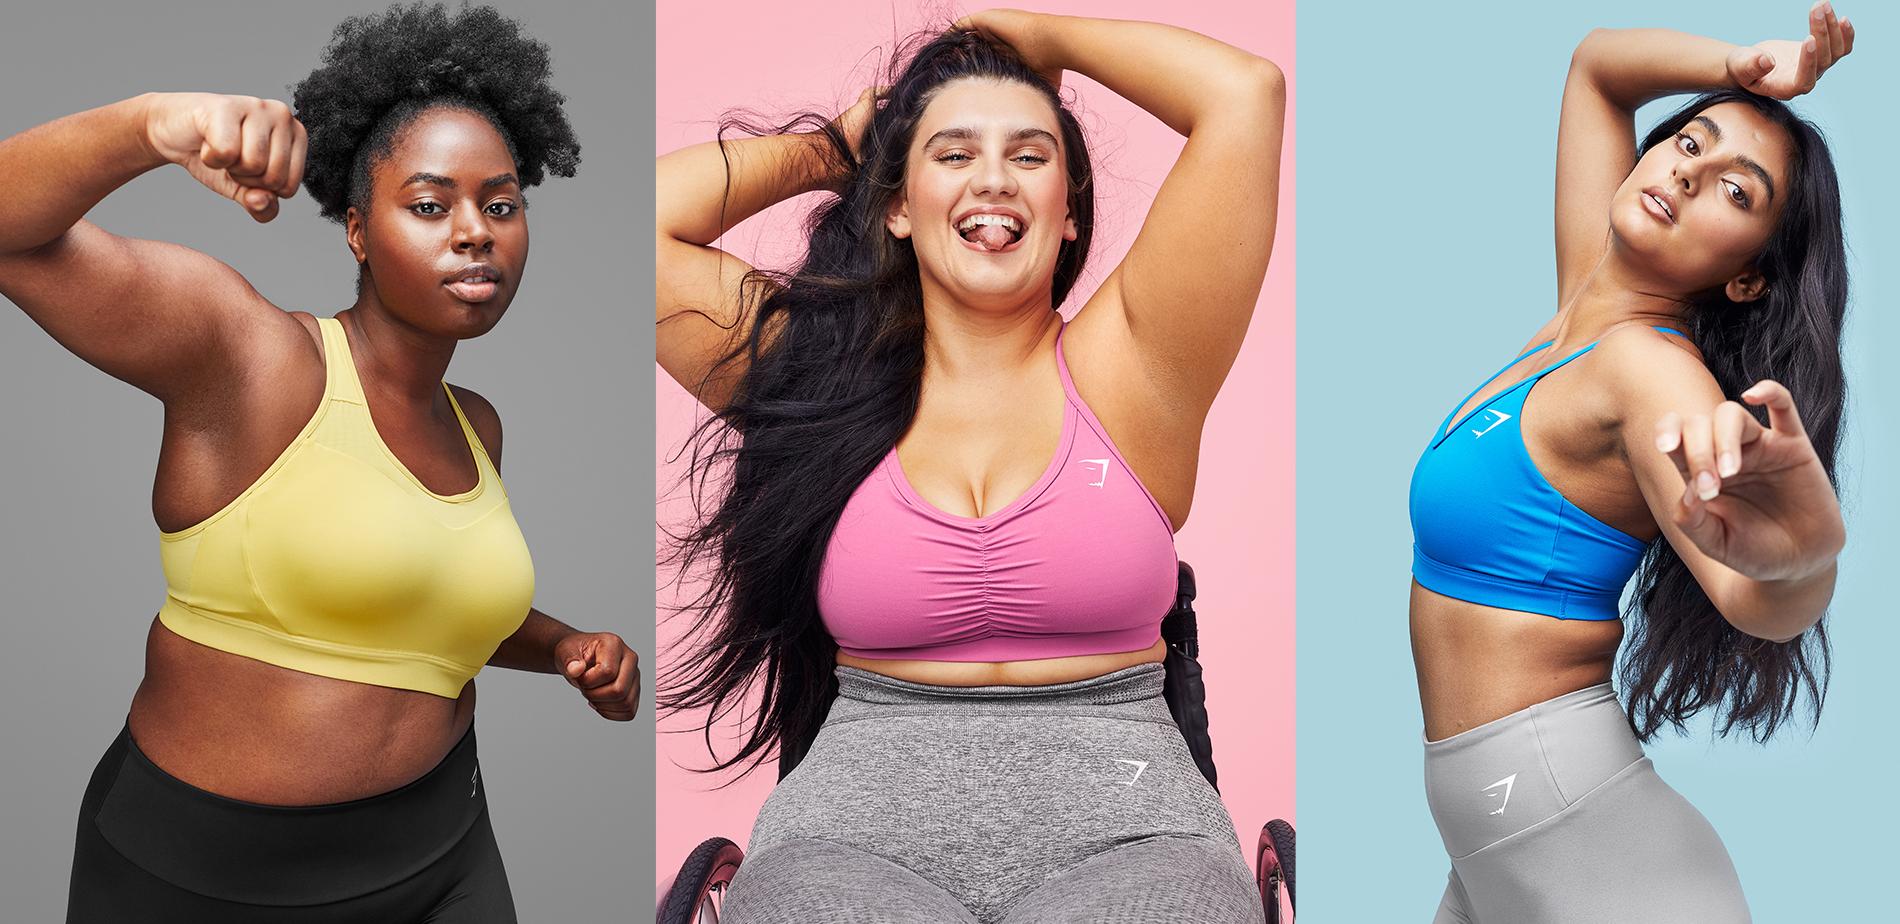 DOES GYMSHARK FIT PLUS SIZE GIRLS!?